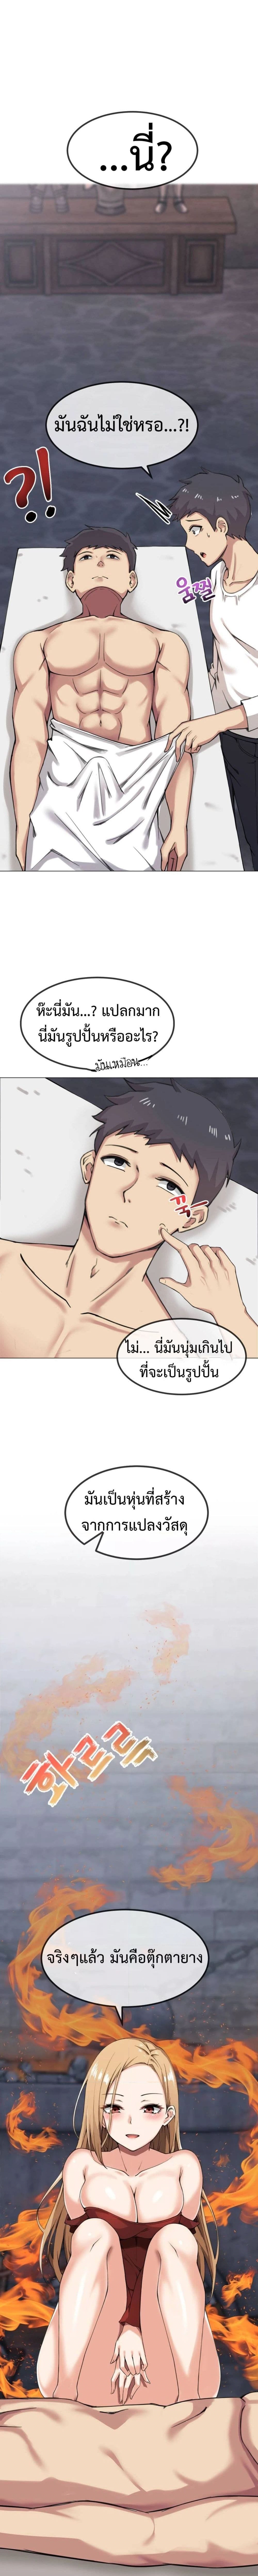 Meat Doll Workshop in Another World ตอนที่ 1 ภาพ 19